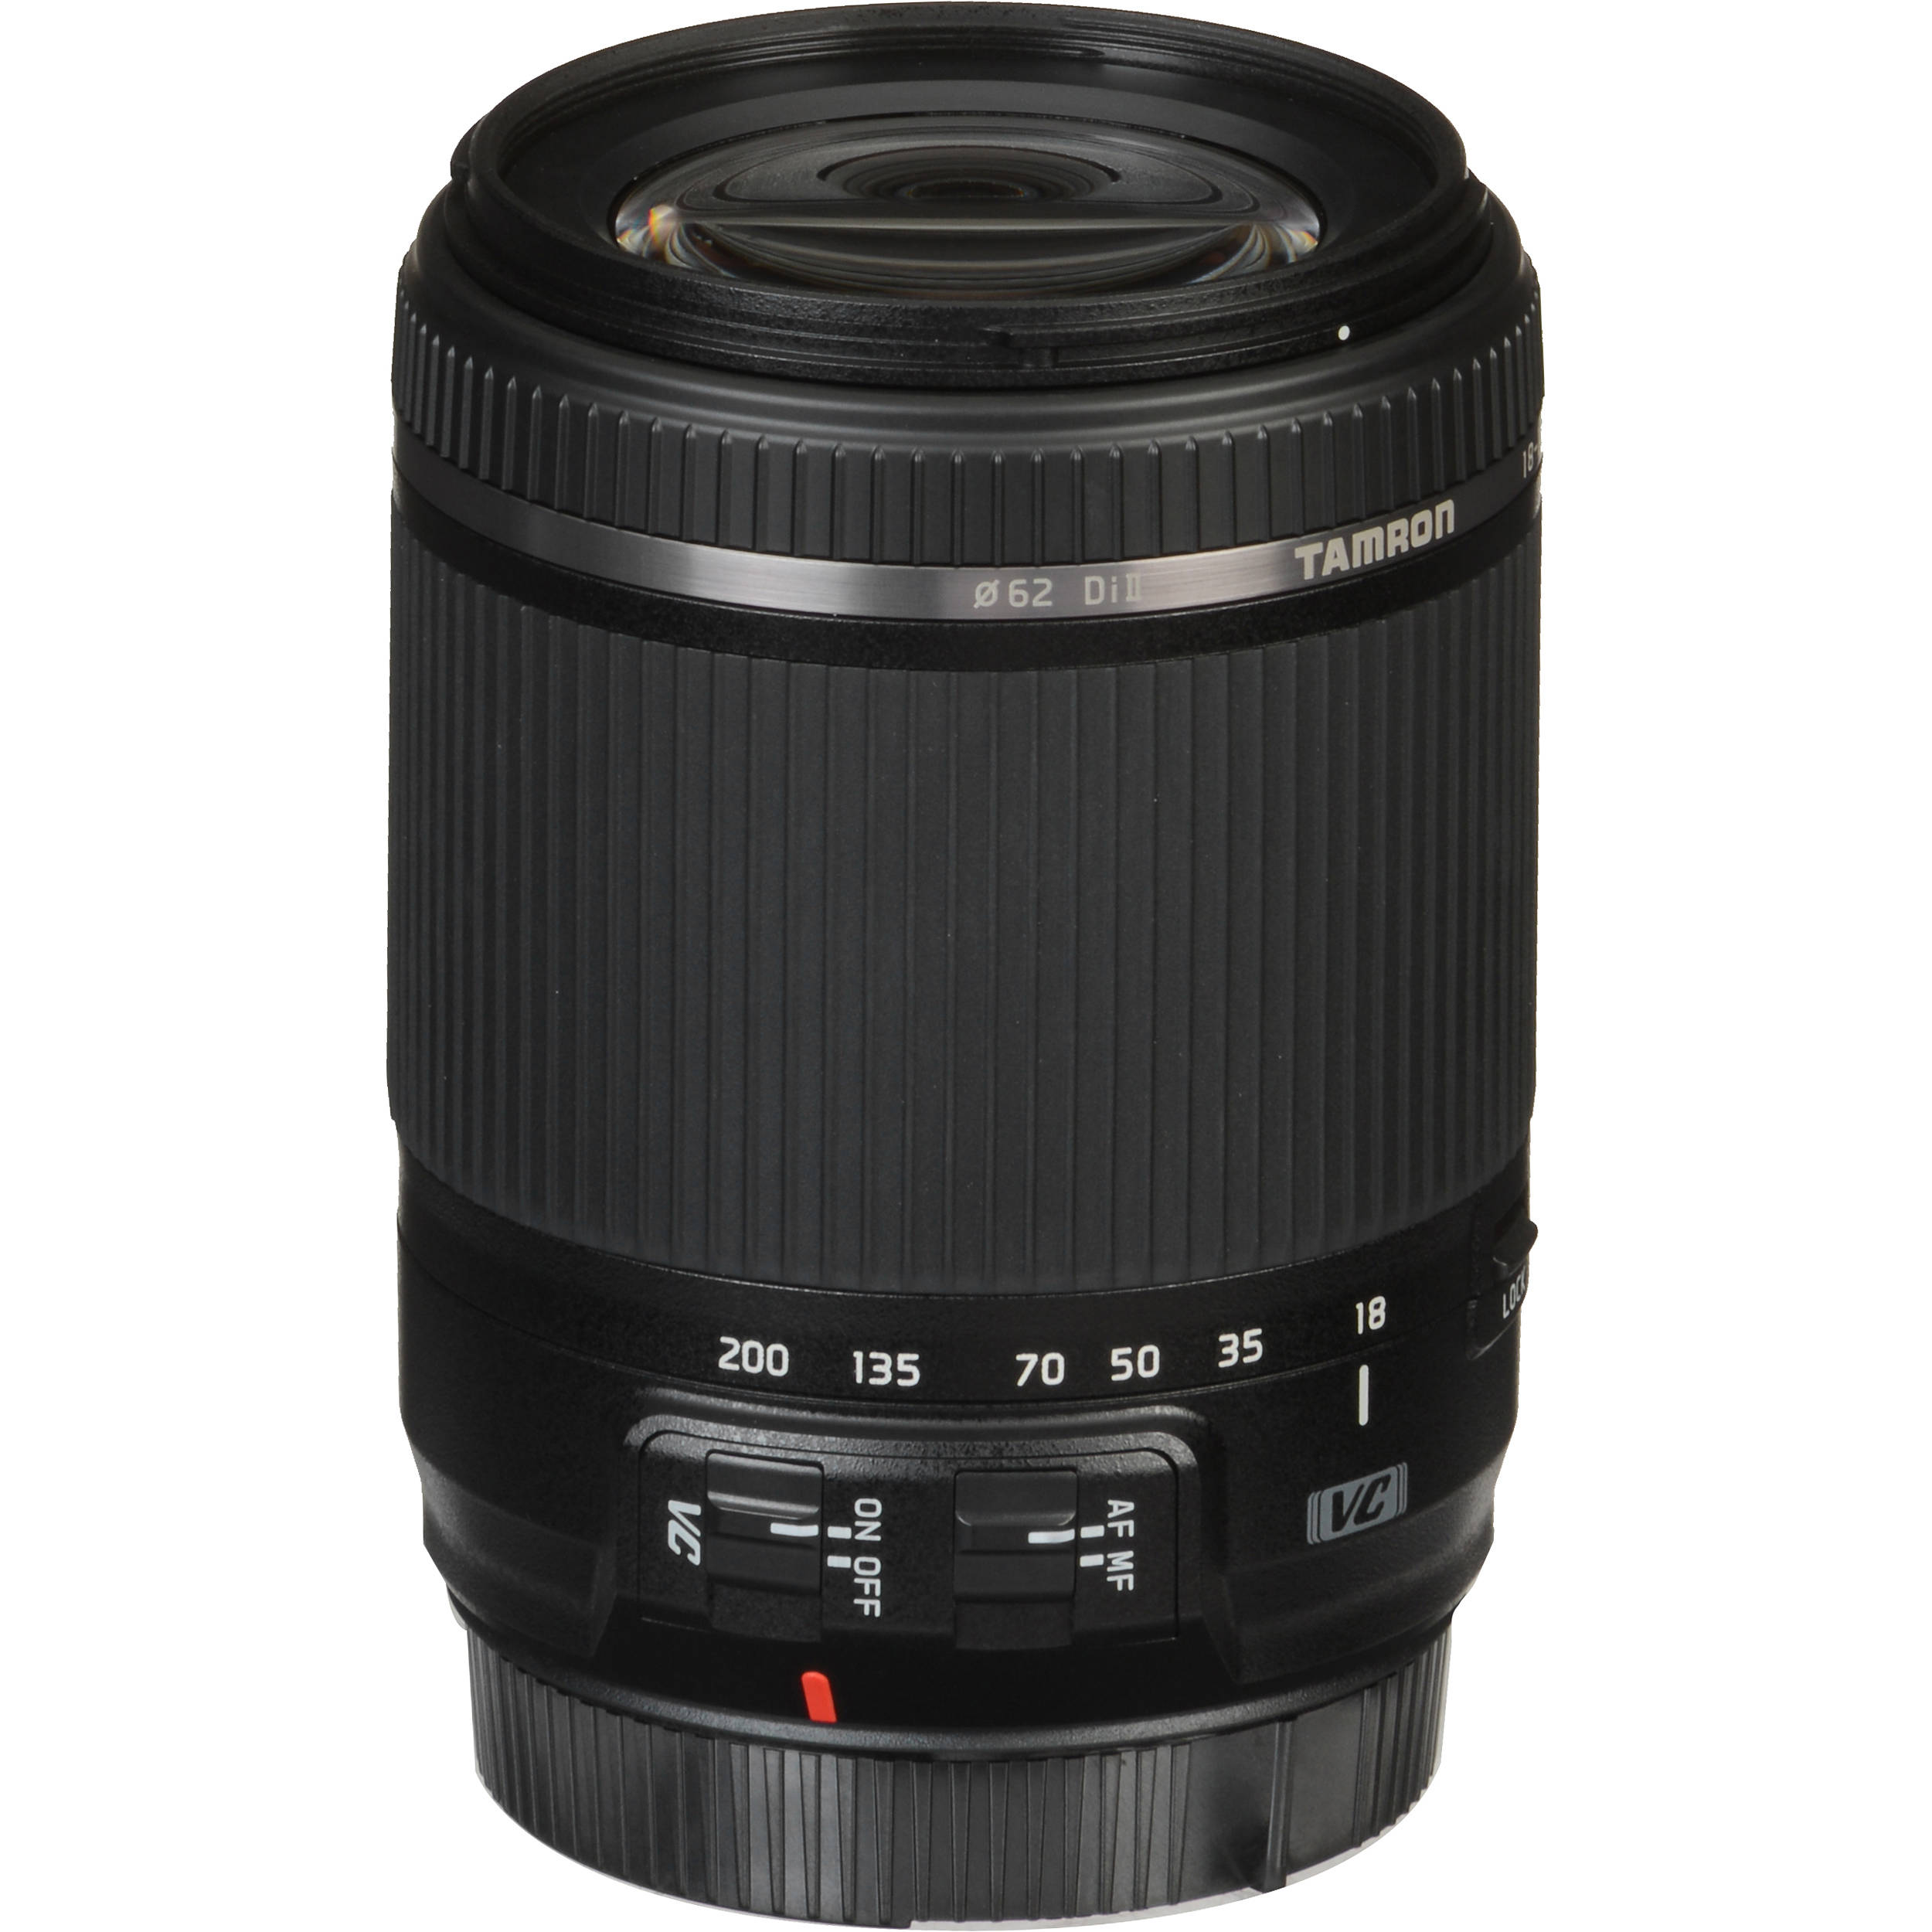 Tamron 18 0mm F 3 5 6 3 Di Ii Lens For Sony A Afb018s 700 B H